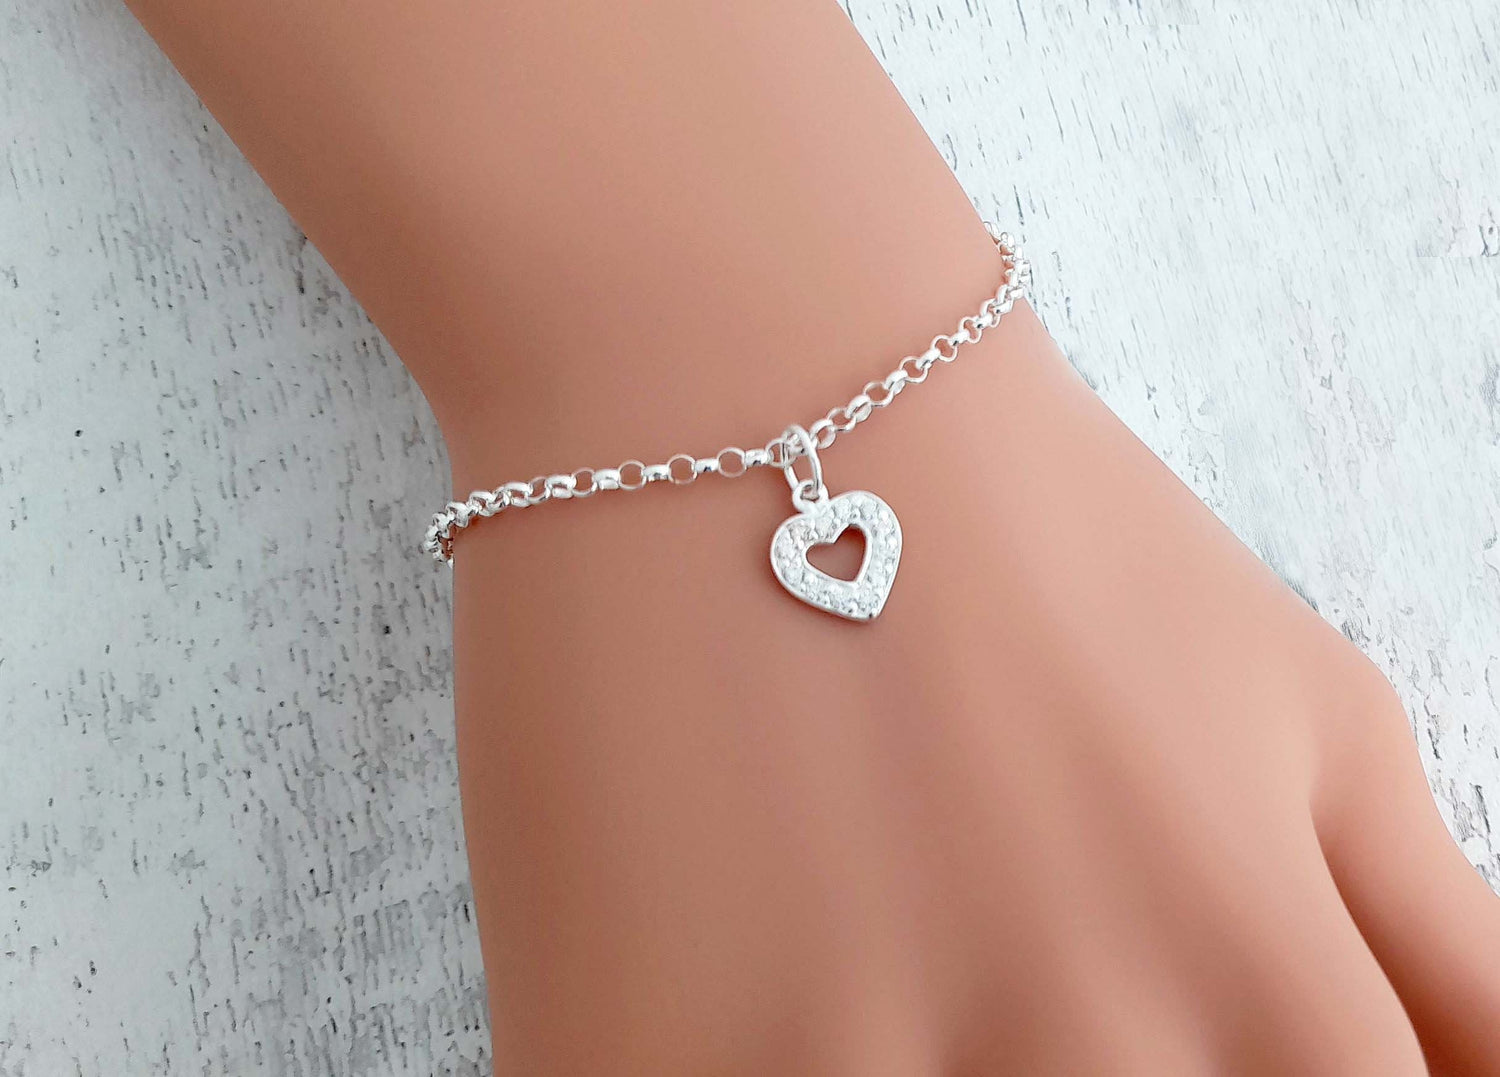 Cubic Zirconia Heart 925 Sterling Silver Link Bracelet with Optional Birthstone - Includes a Personalised Gift Message